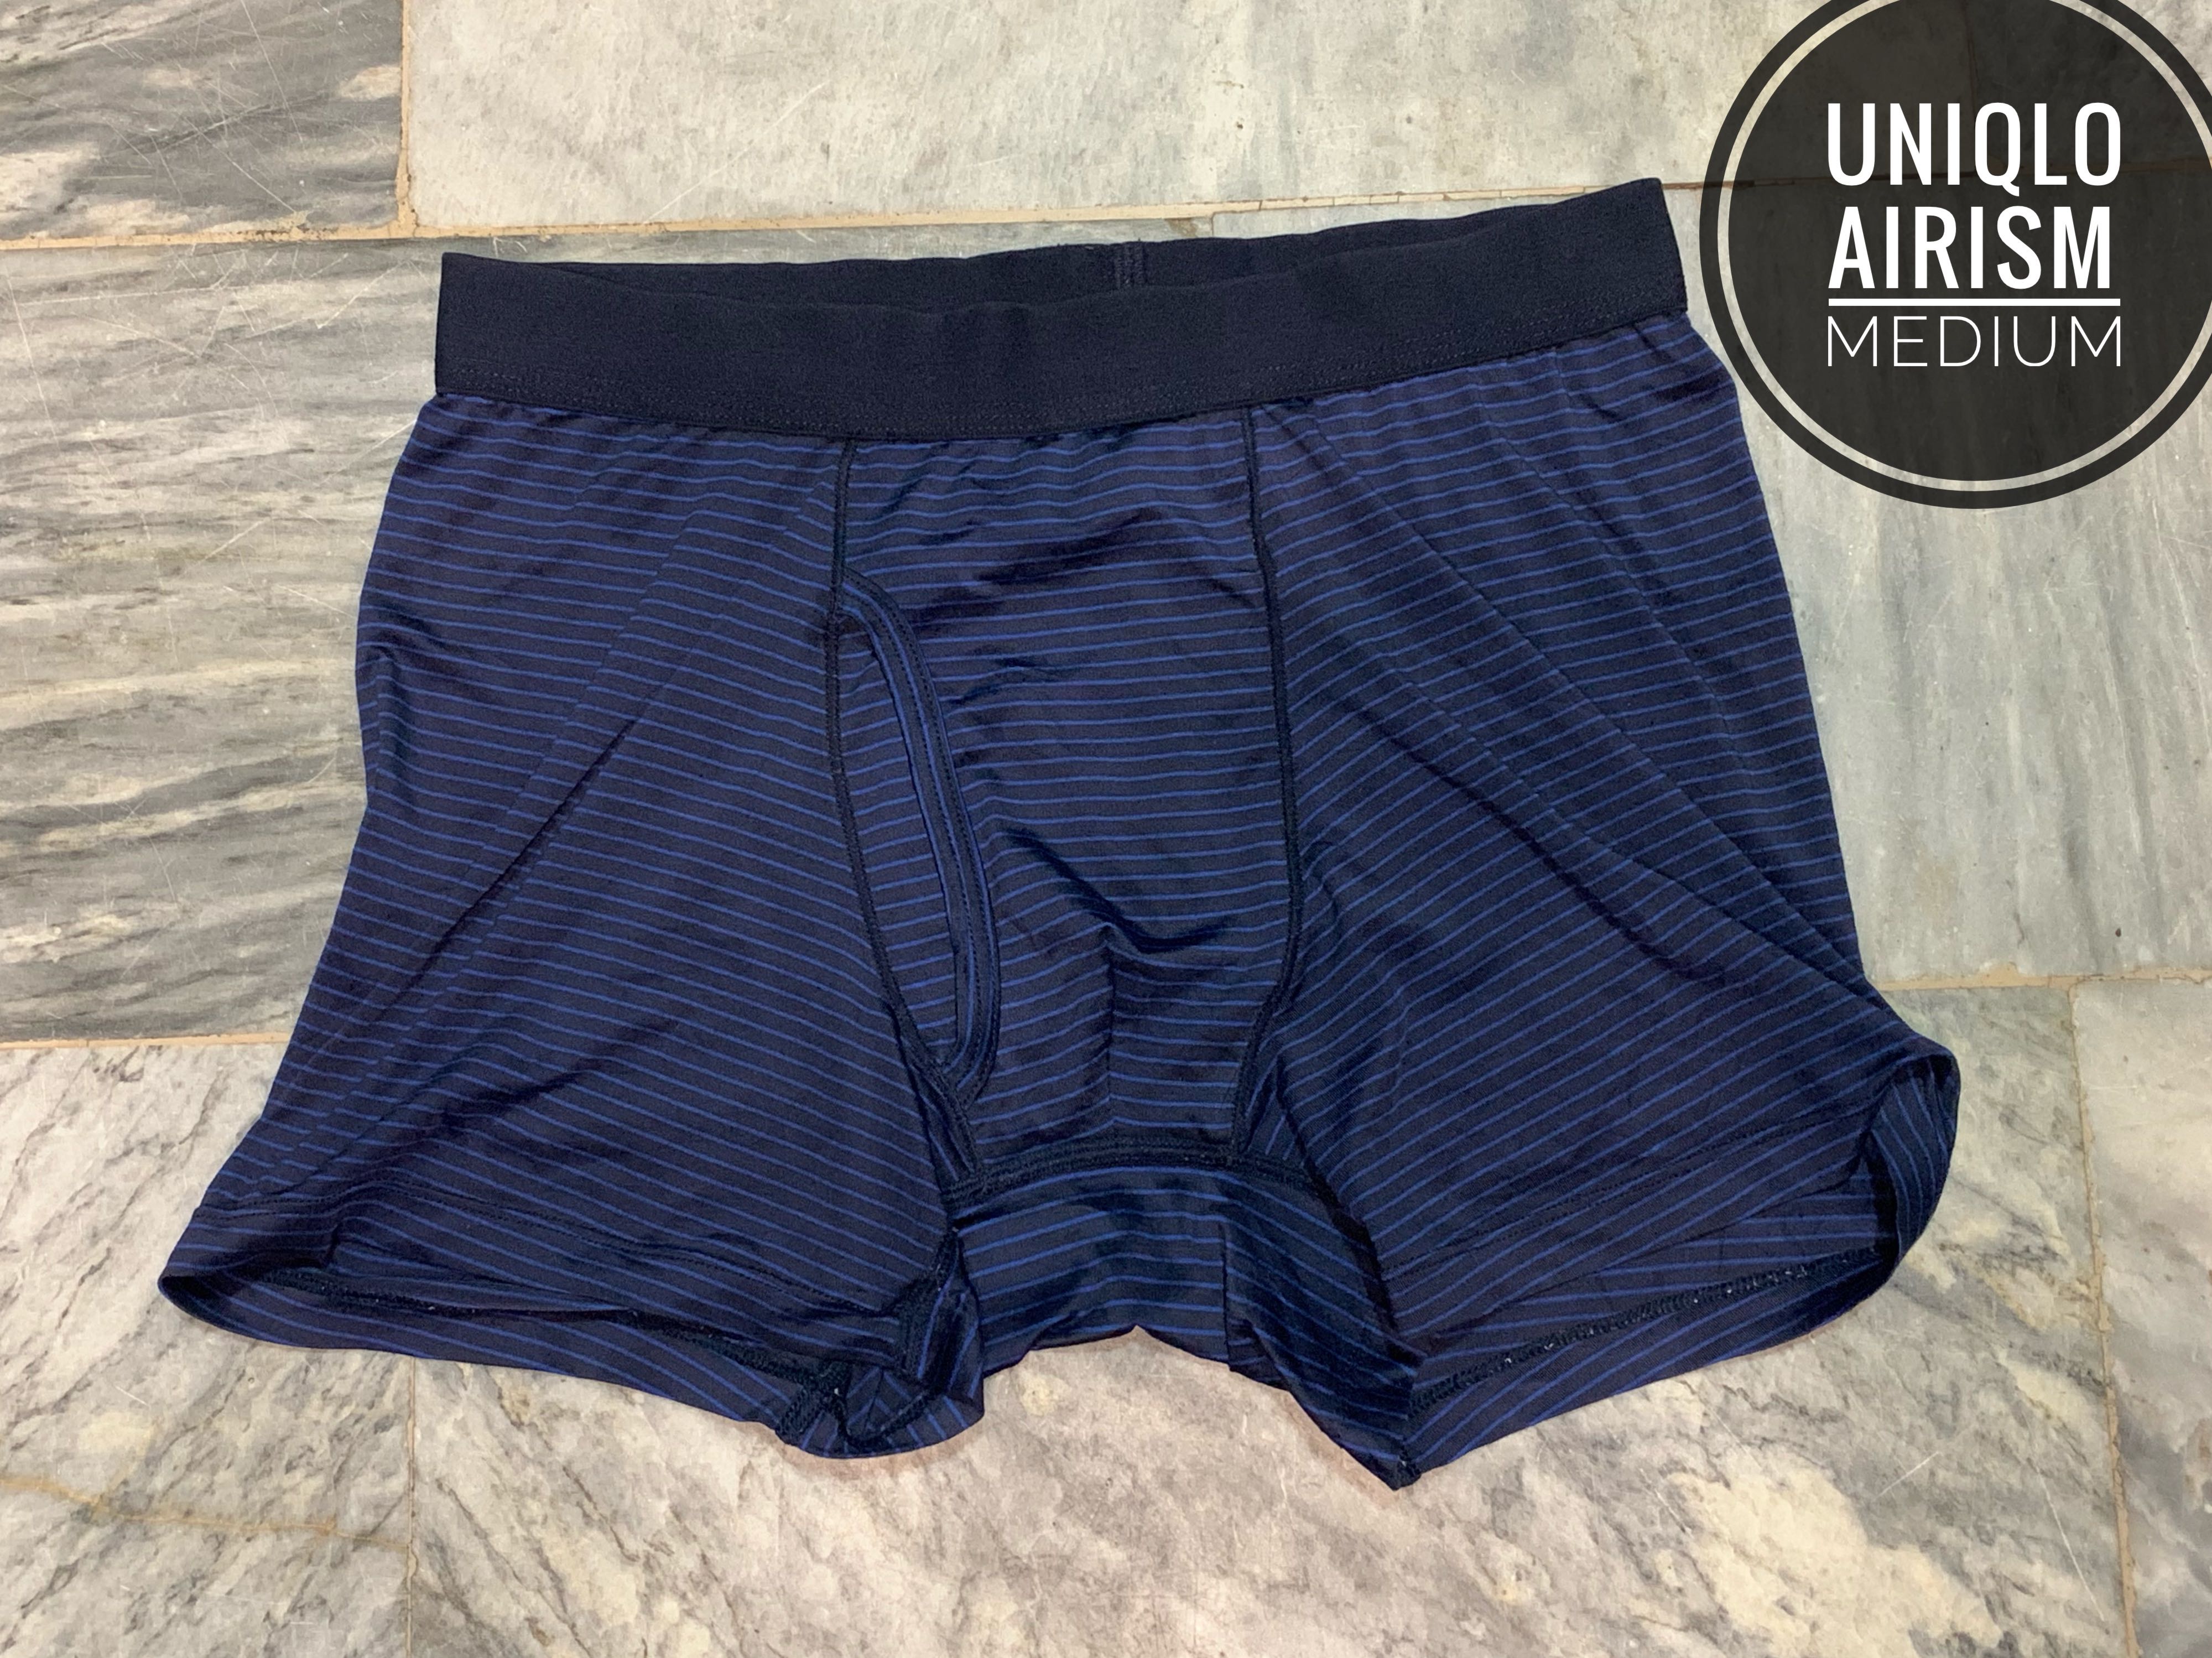 https://media.karousell.com/media/photos/products/2020/7/17/uniqlo_airism_boxer_brief_1594945883_accd7877.jpg